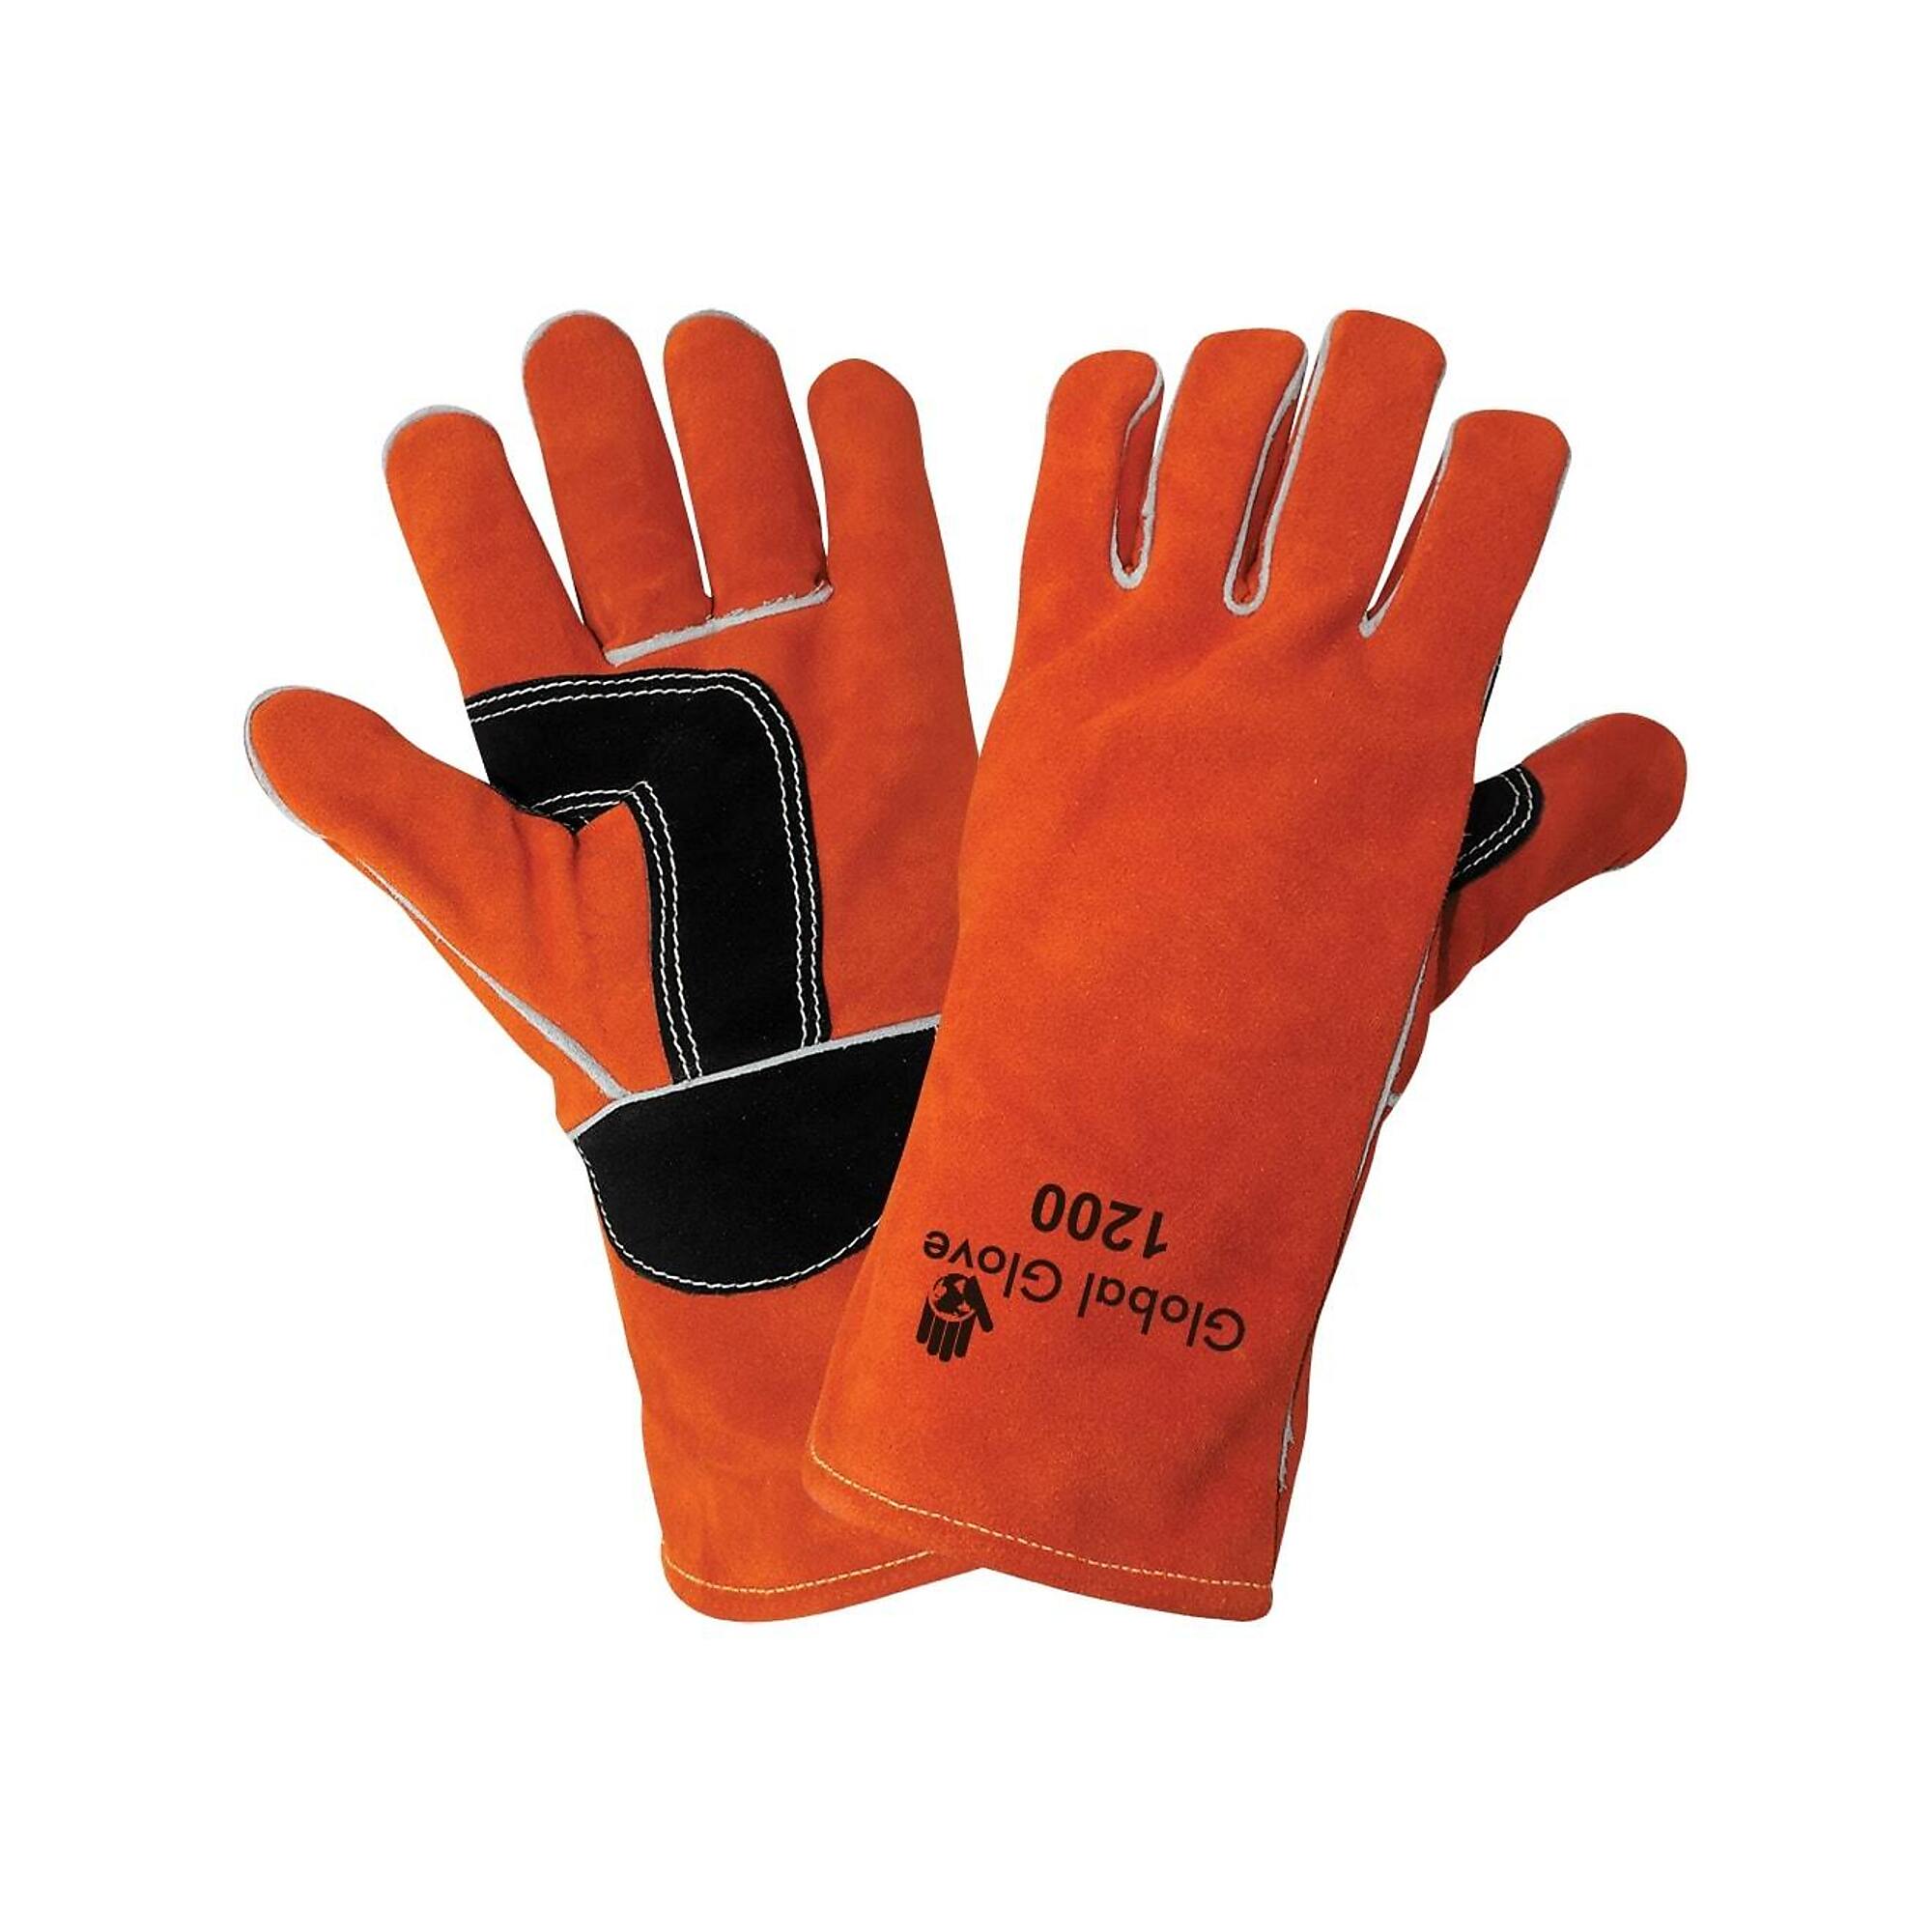 Global Glove, Prem Leather 16Inch, Cut Resistant A2 Welders Gloves - 12 Pairs, Size One Size, Color Orange/Black, Included (qty.) 12 Model 1200